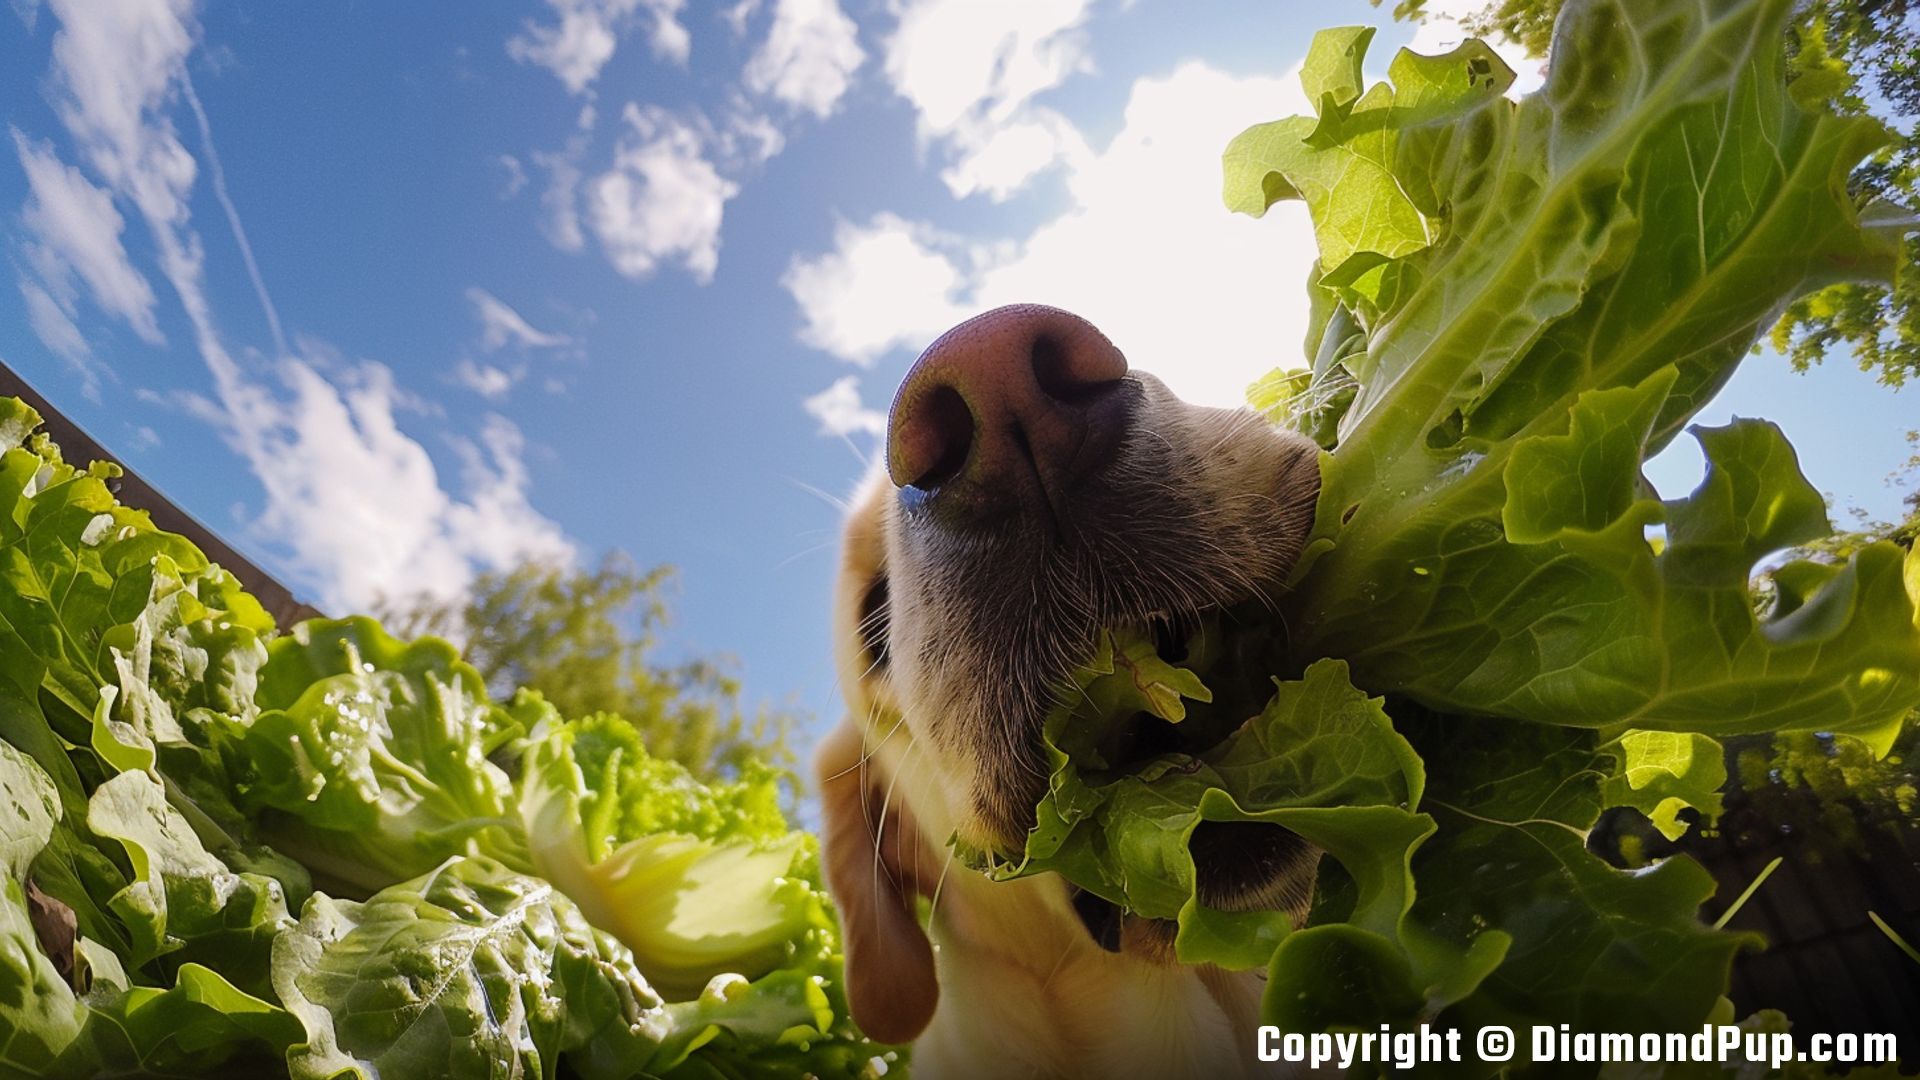 Photograph of a Playful Labrador Eating Lettuce